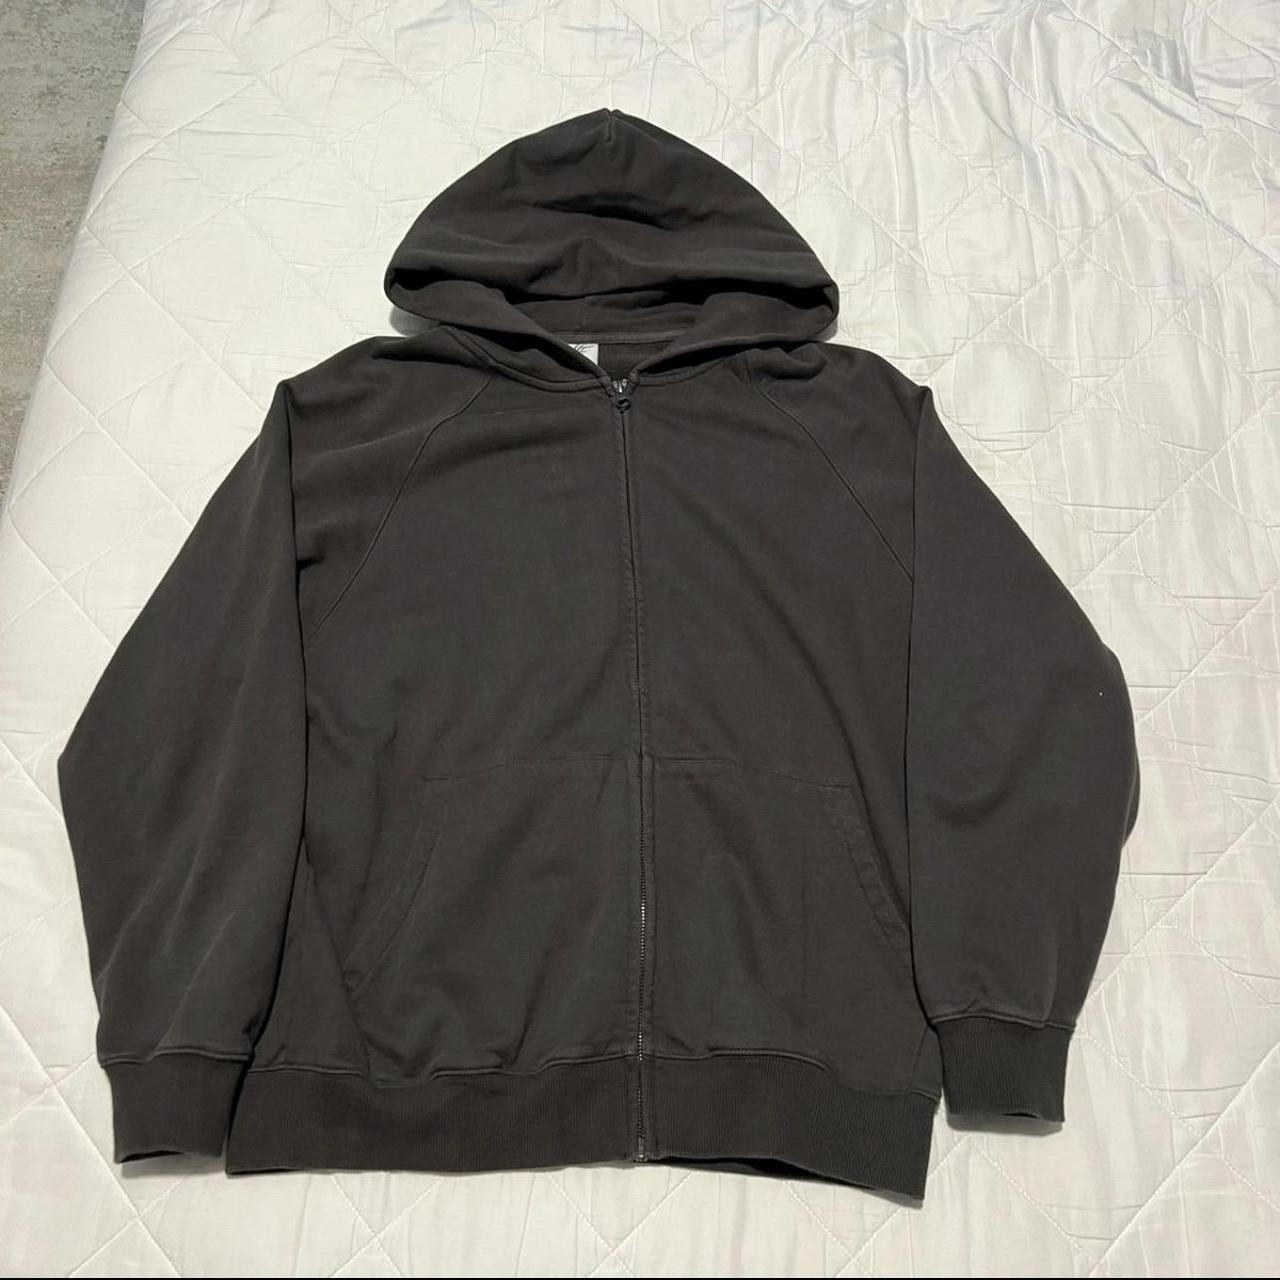 item listed by ripsquaddtg